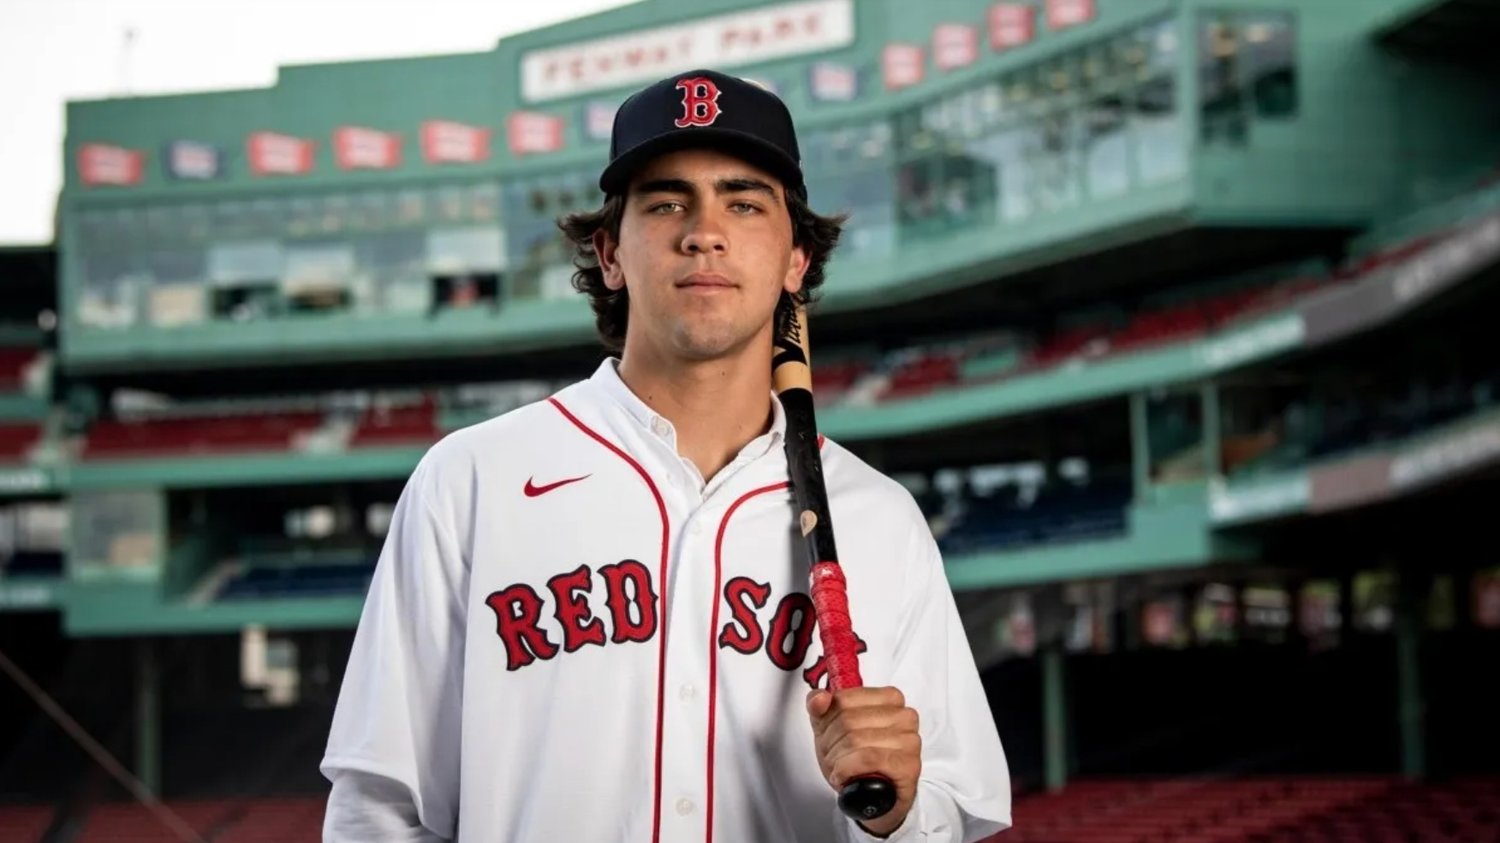 boston red sox player